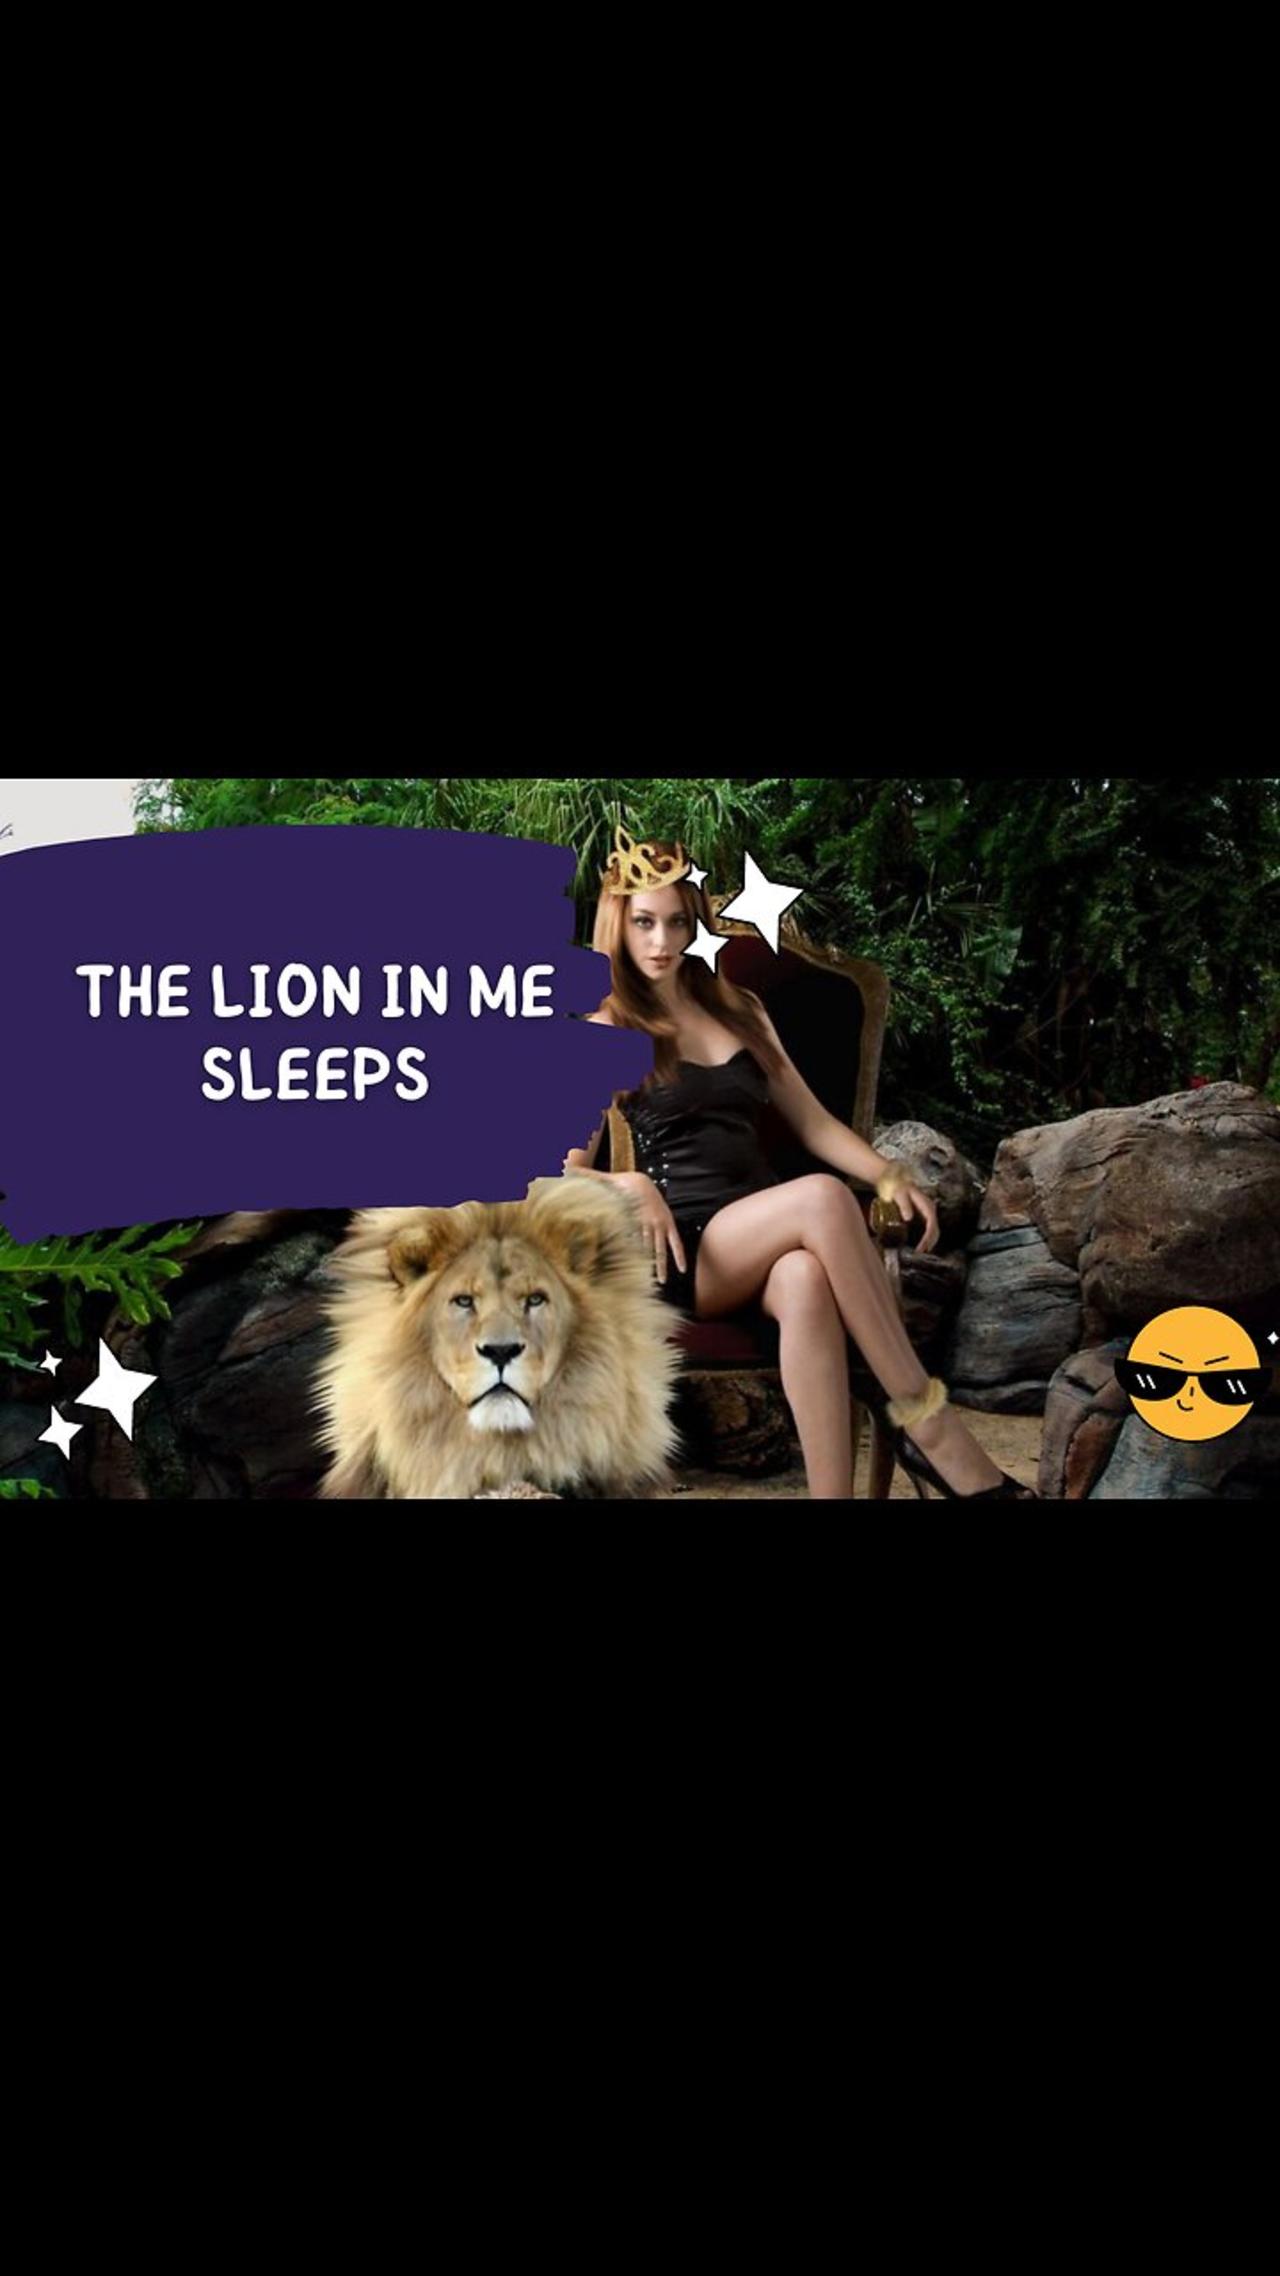 The lion in me sleeps